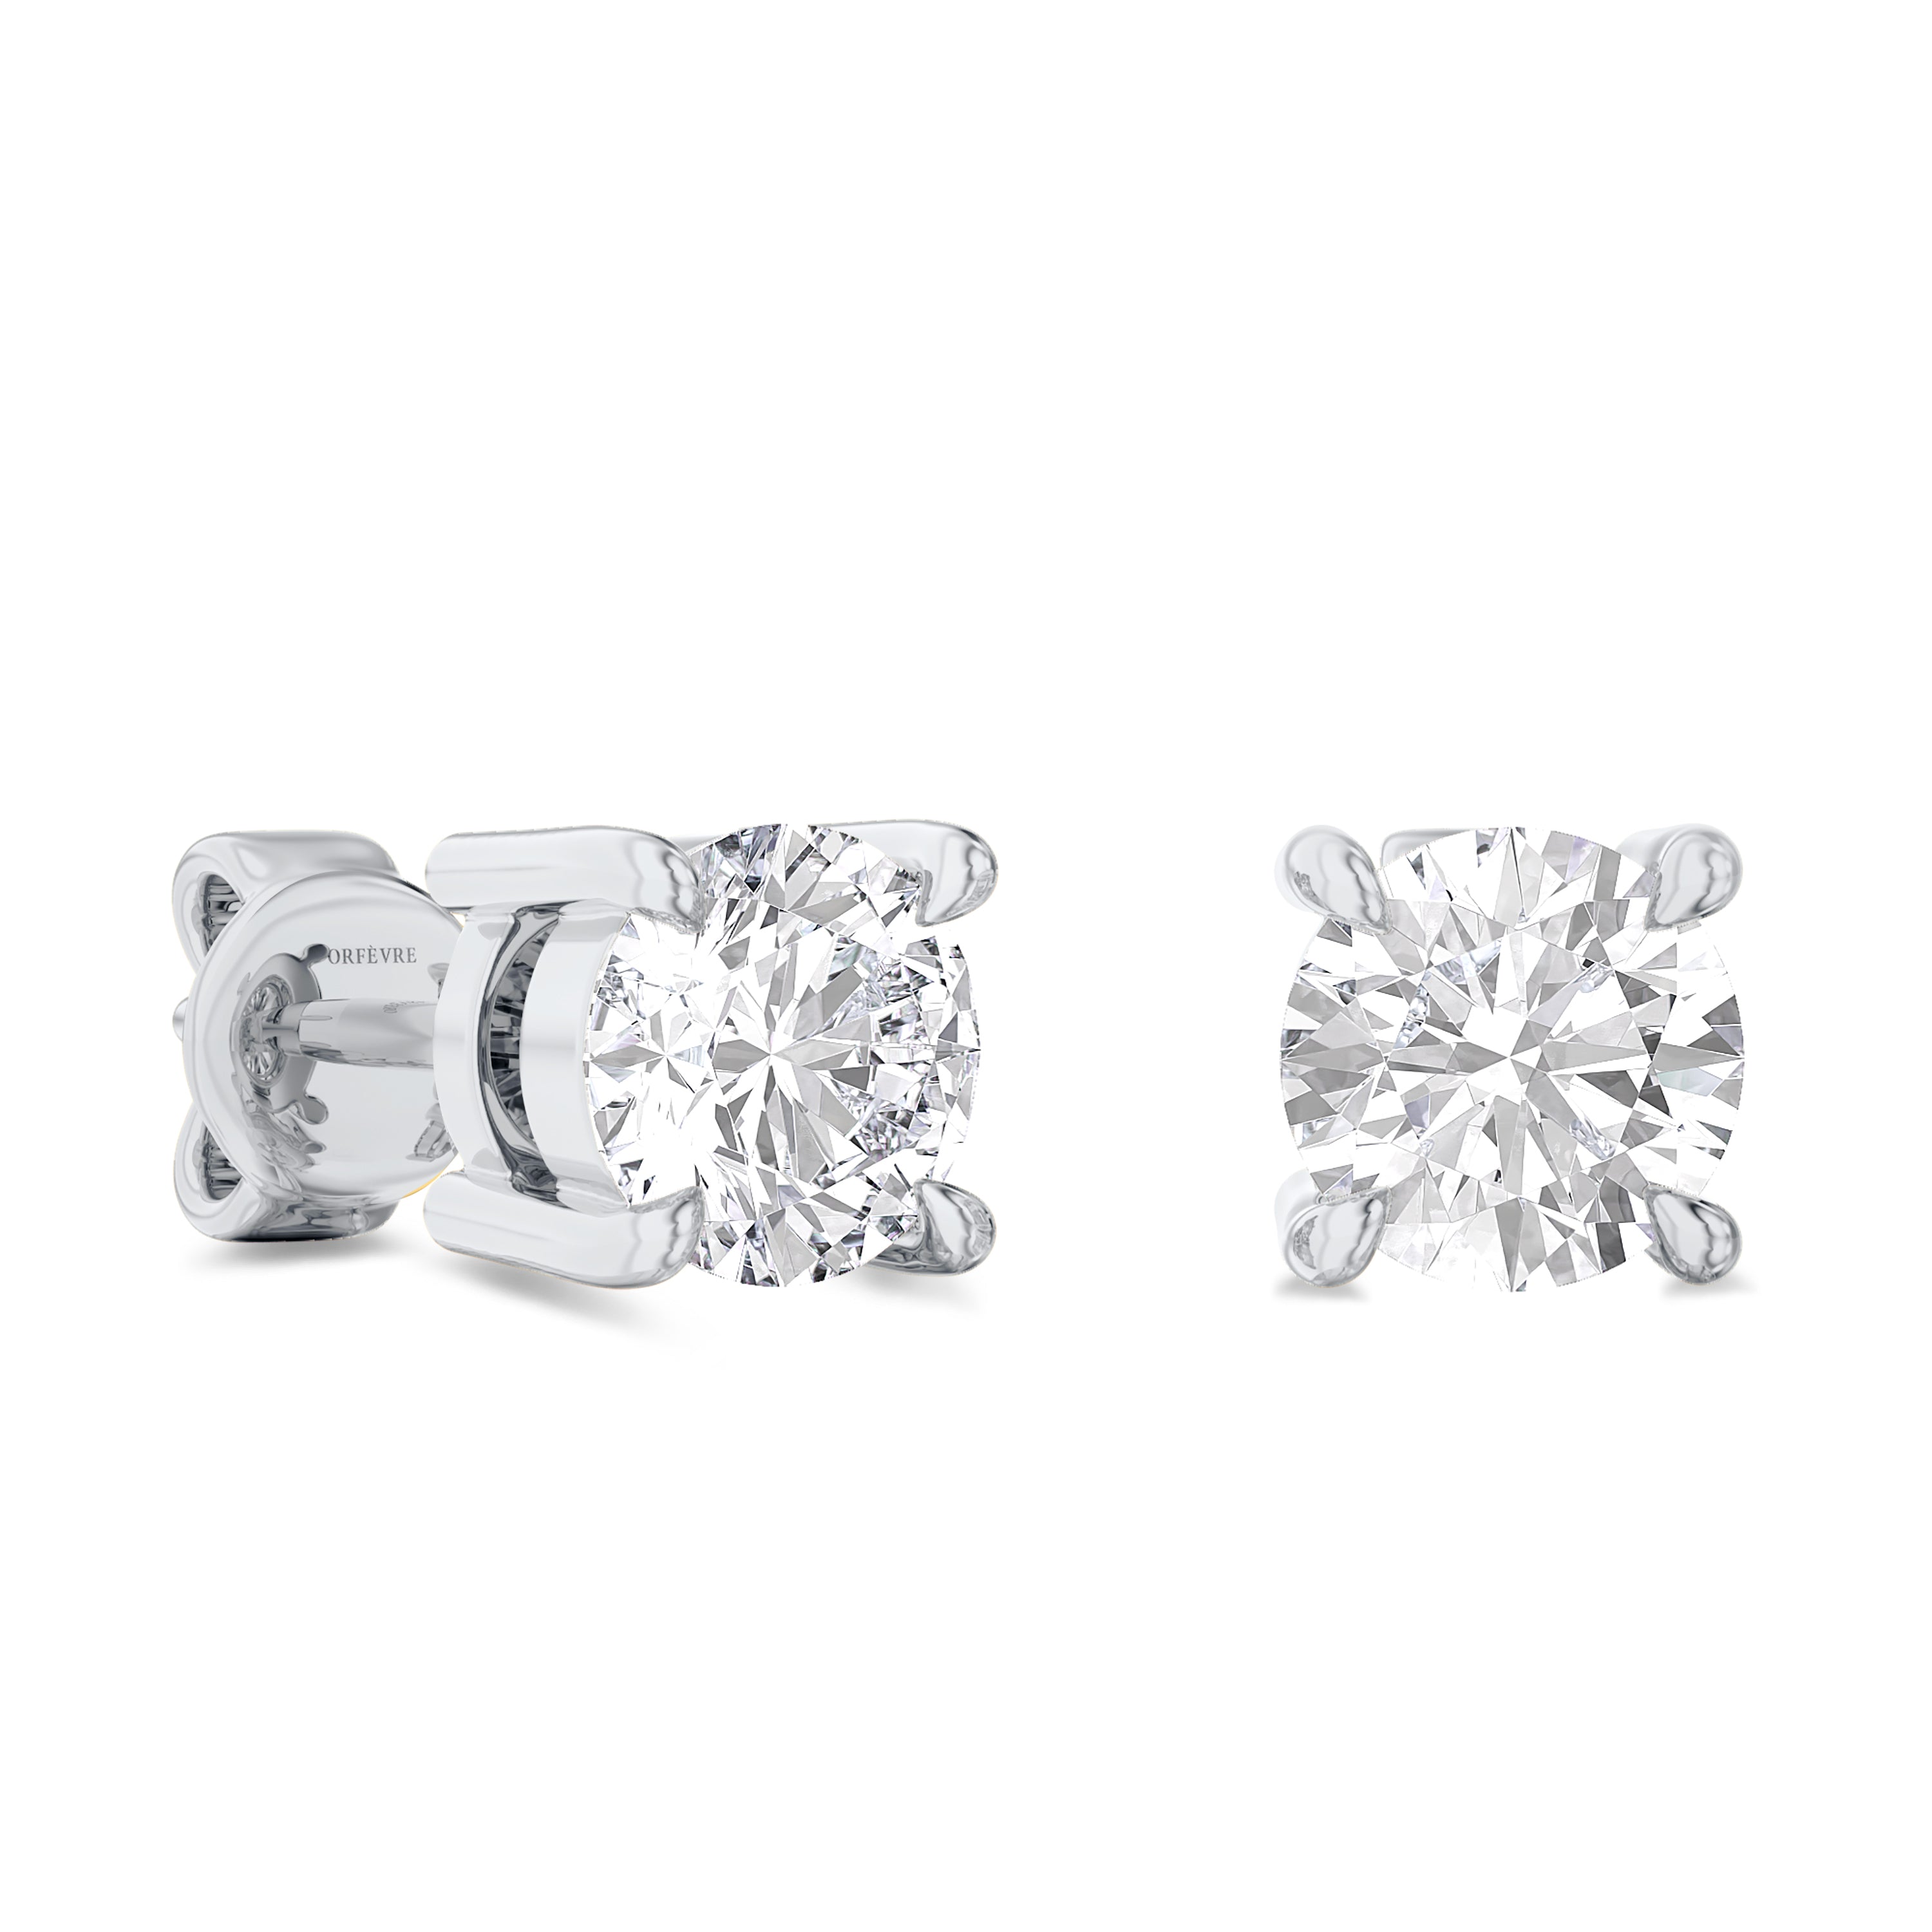 0.77 carat lab grown solitaire diamond earrings in 18k gold, E-F color, VS-SI clarity